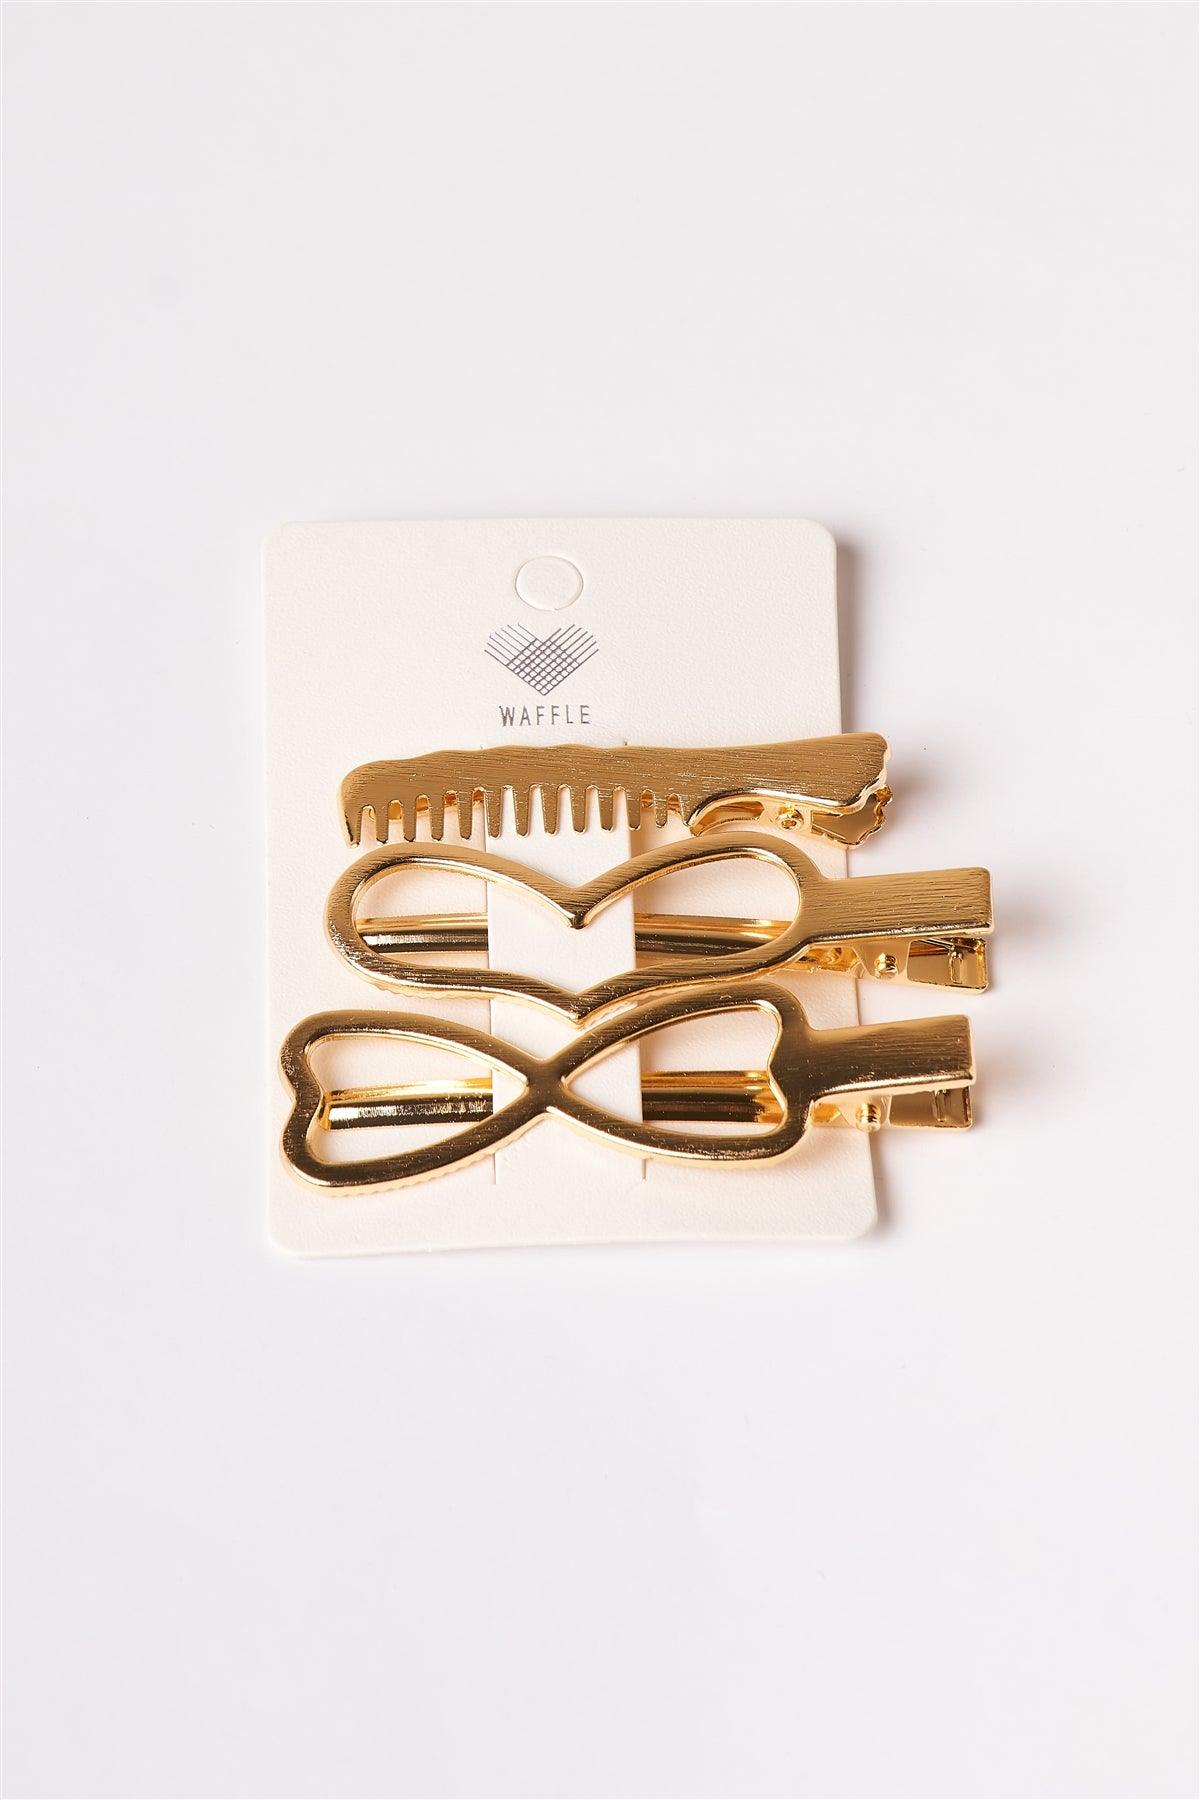 Gold Heart Shaped Clips /12 Pack